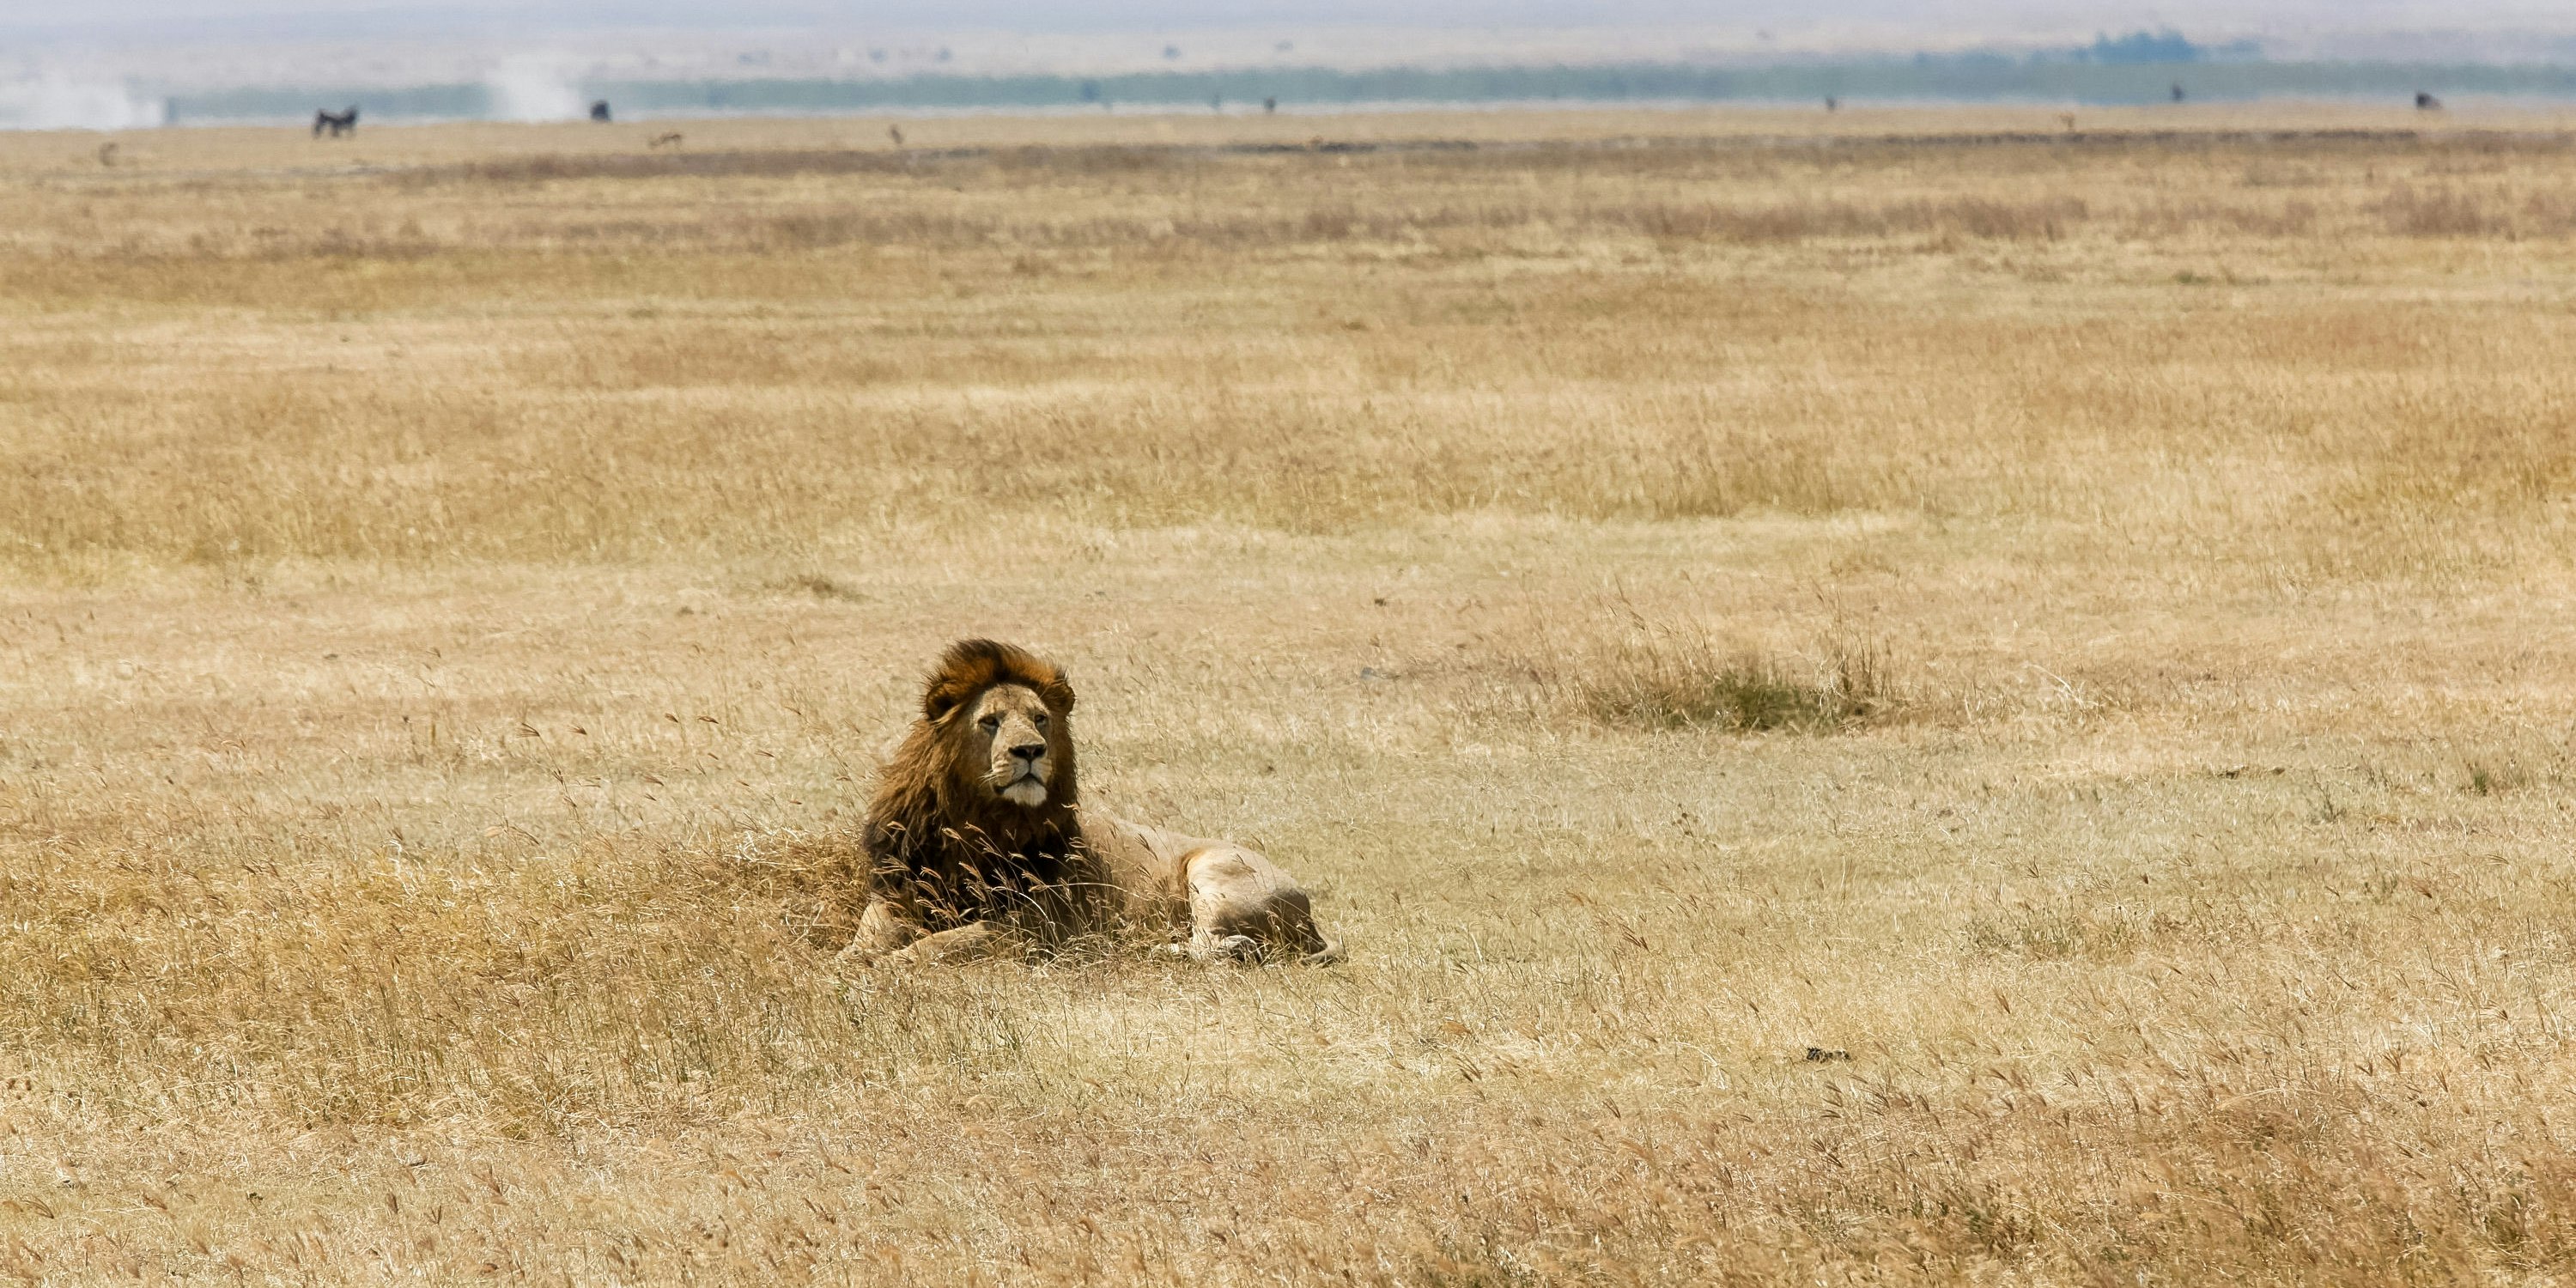 A to Z: Everything You Need to Know About Traveling to Tanzania